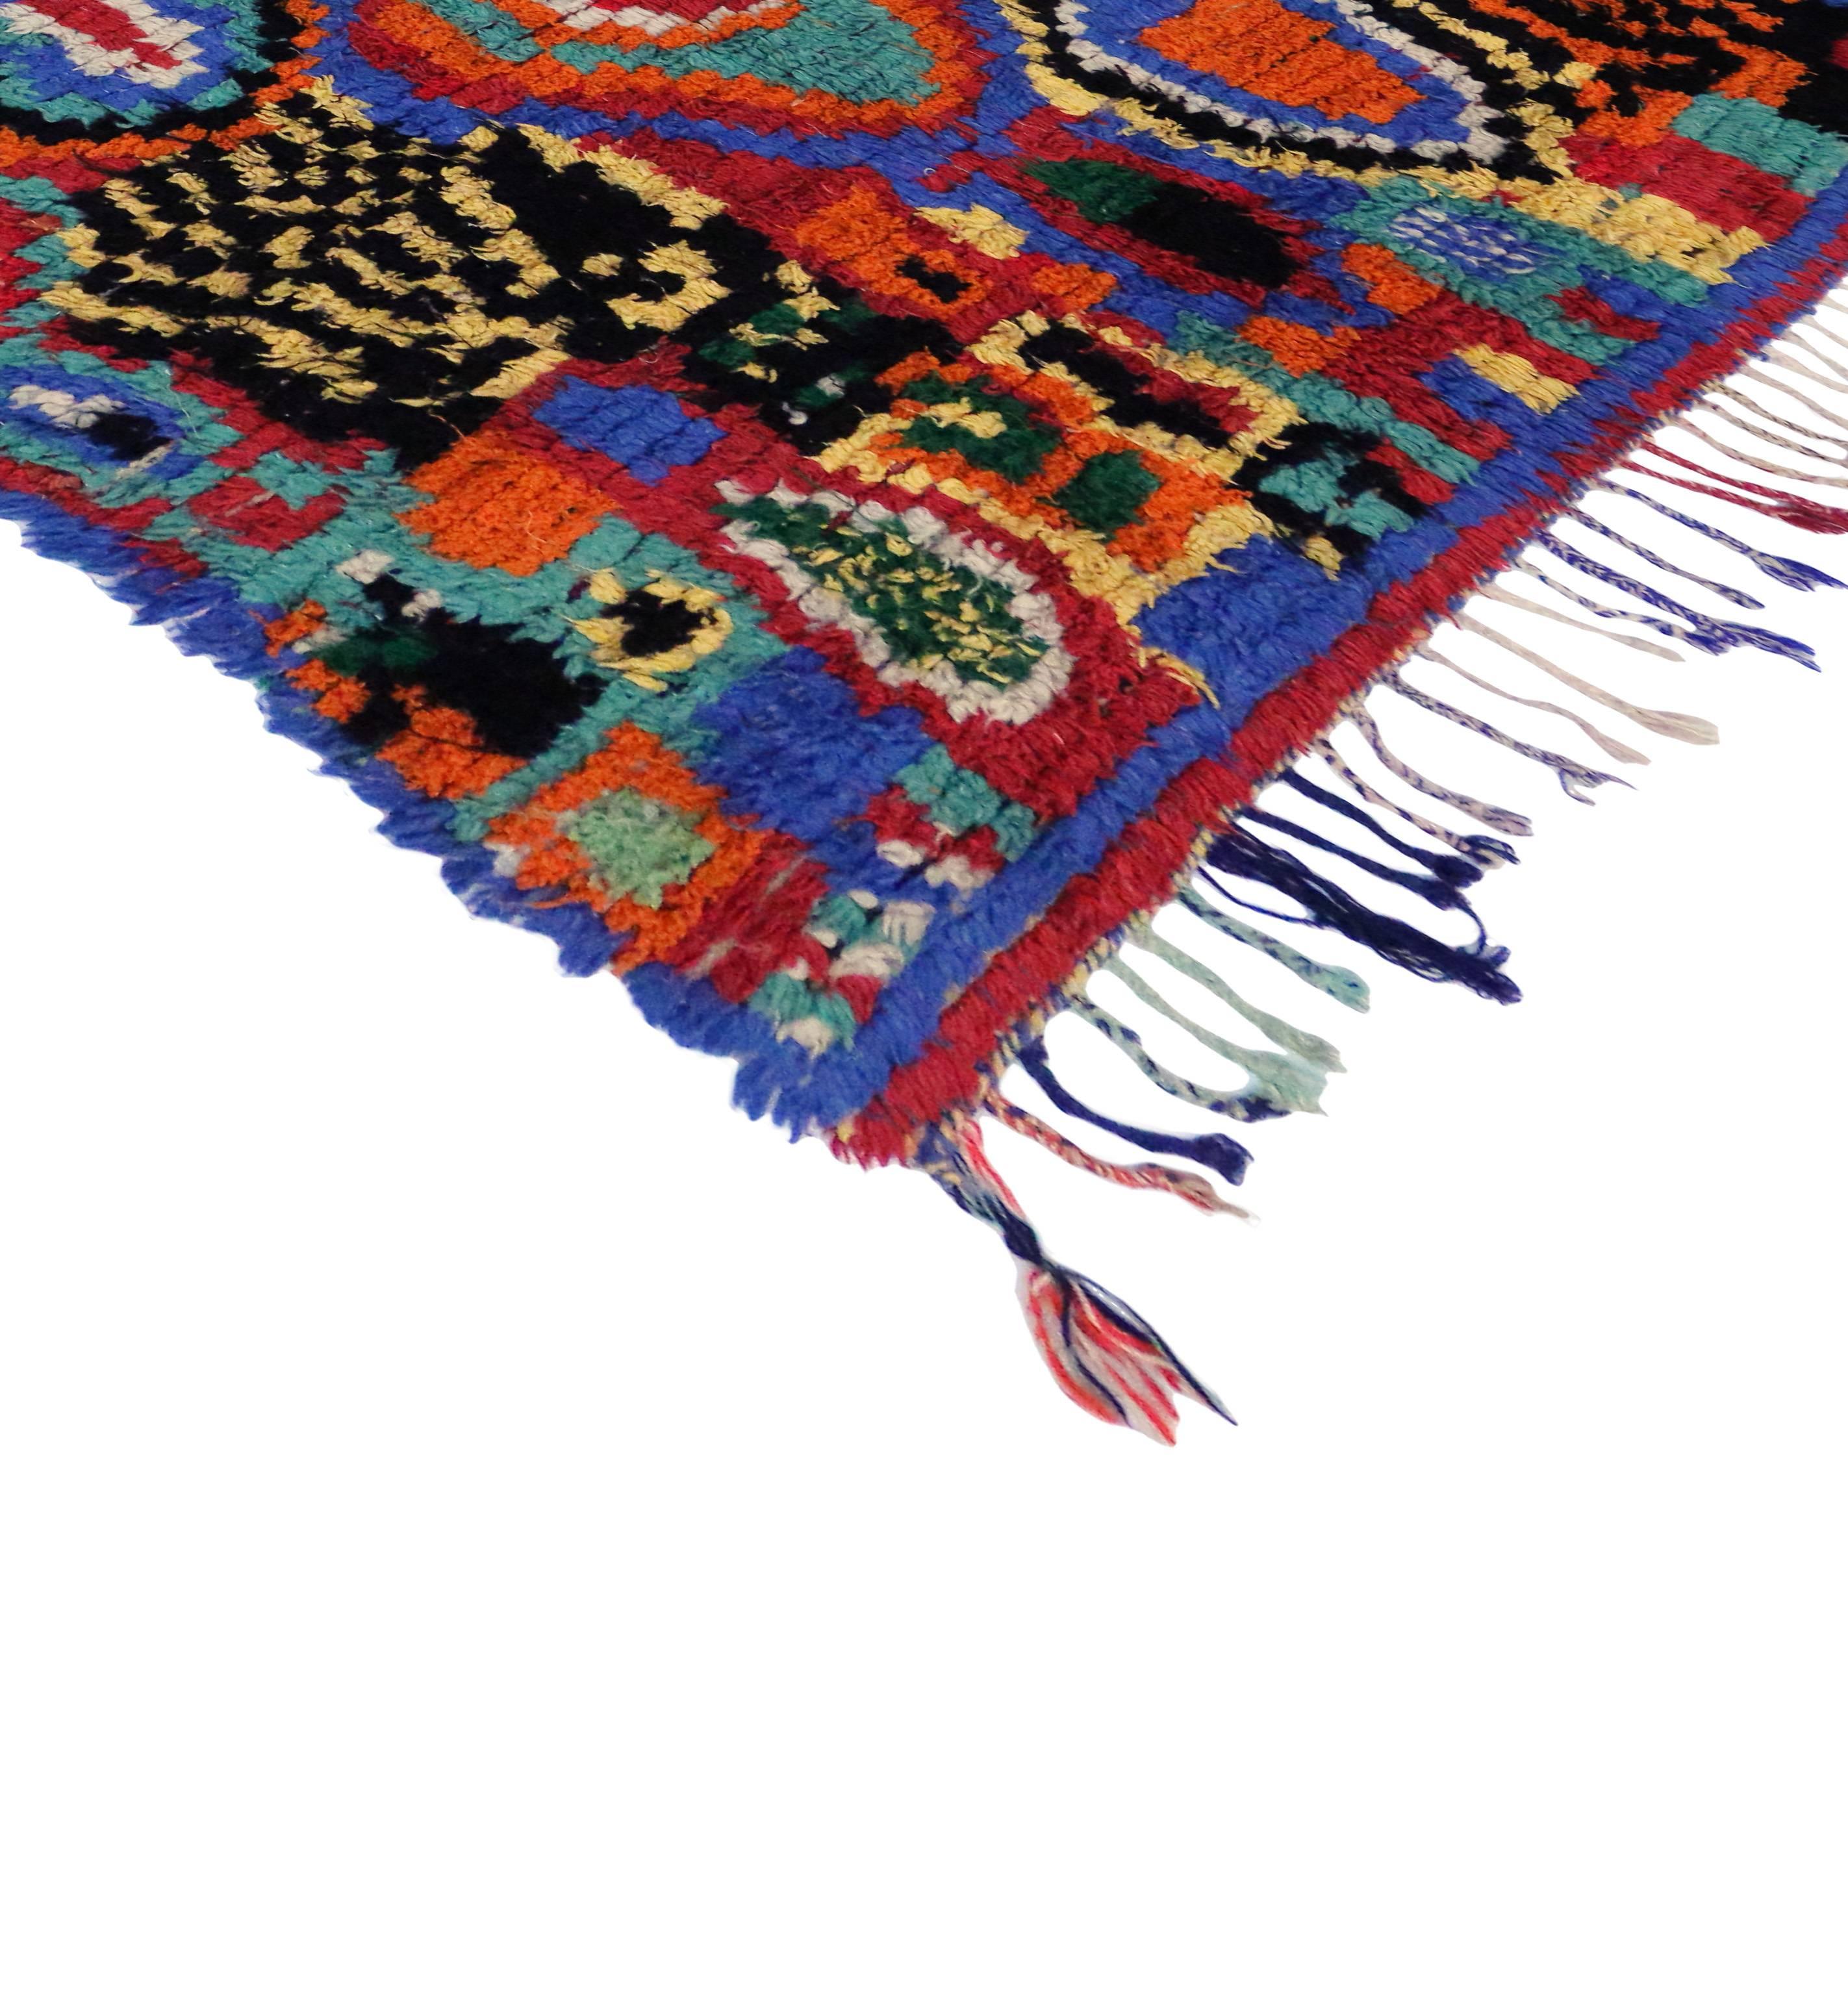 Hand-Knotted Vintage Berber Moroccan Rug with Contemporary Abstract Design